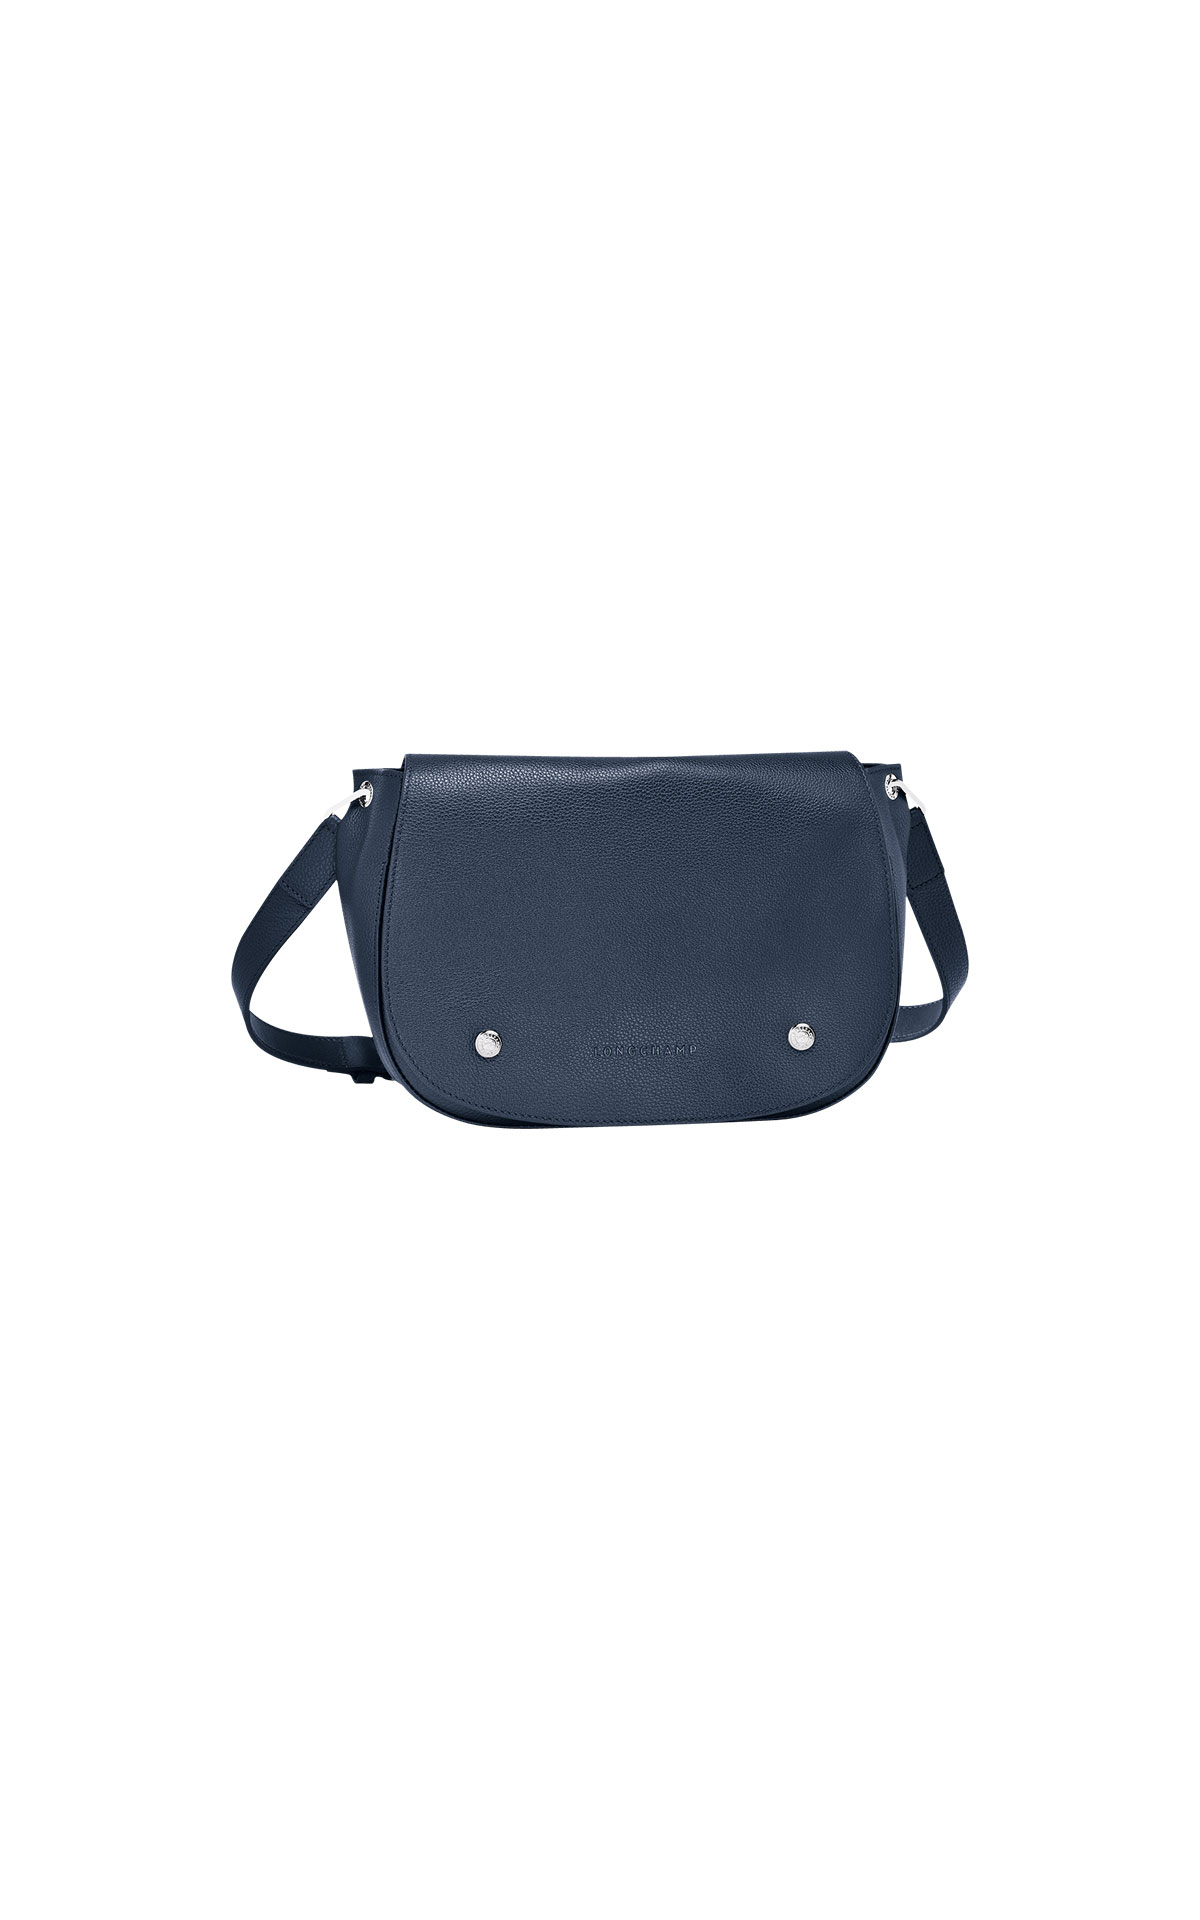 Longchamp Le foulonne hobo bag with snap botton closure from Bicester Village